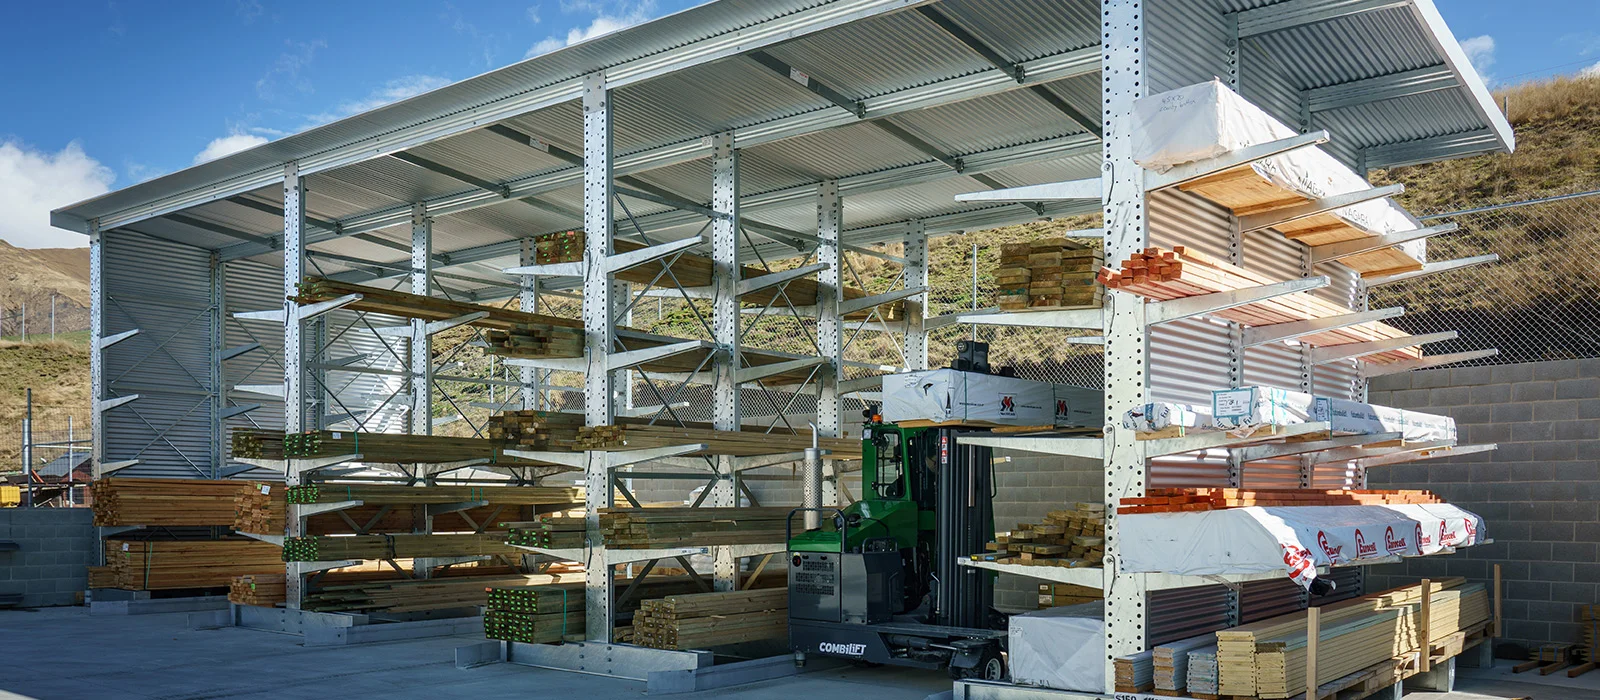 Southern Lakes iTM Wanaka, Full Trade Store Fitout, Cantilever Racking, Retail Shelving, Moulding Rack, A Frame Rack, iRS, Integrated Rack Structure, Dry Storage, Timber Storage, Side Loader, Combi-Lift